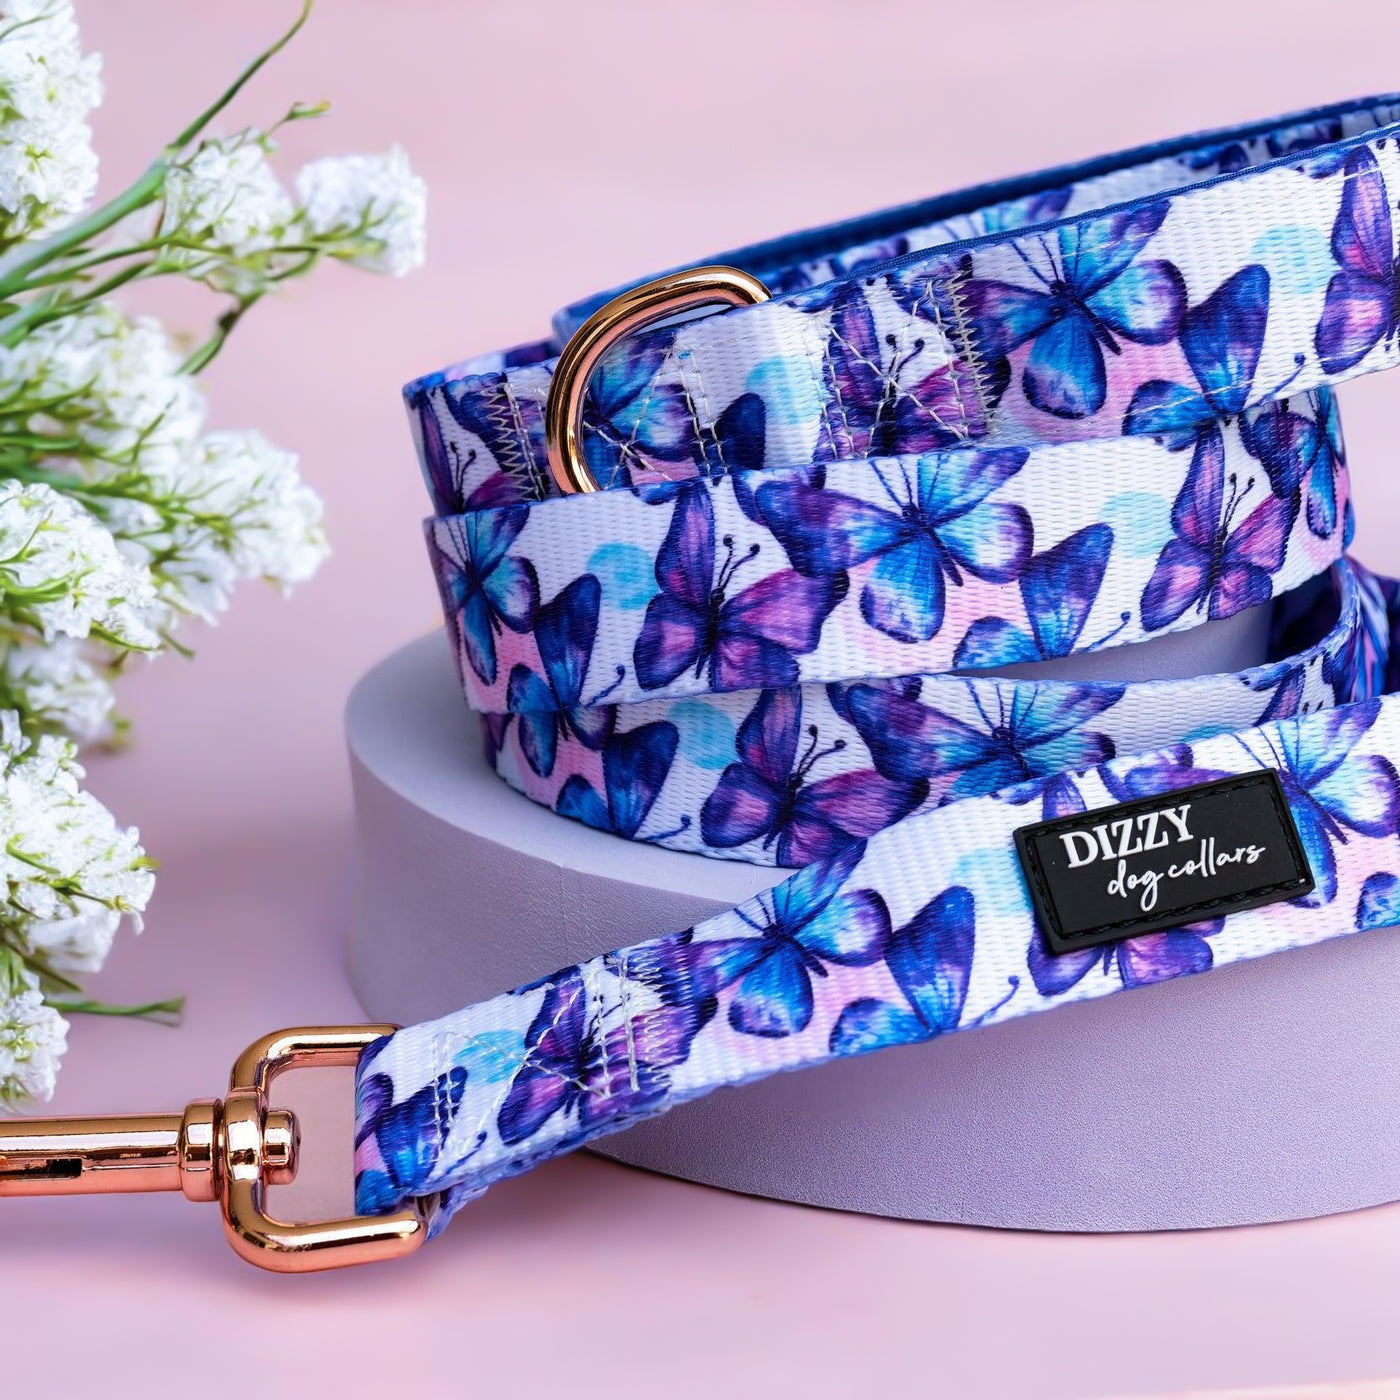 A stylish dog leash adorned with blue and purple butterflies. It includes a sturdy clasp and D-ring, finished in a metallic rose gold tone.